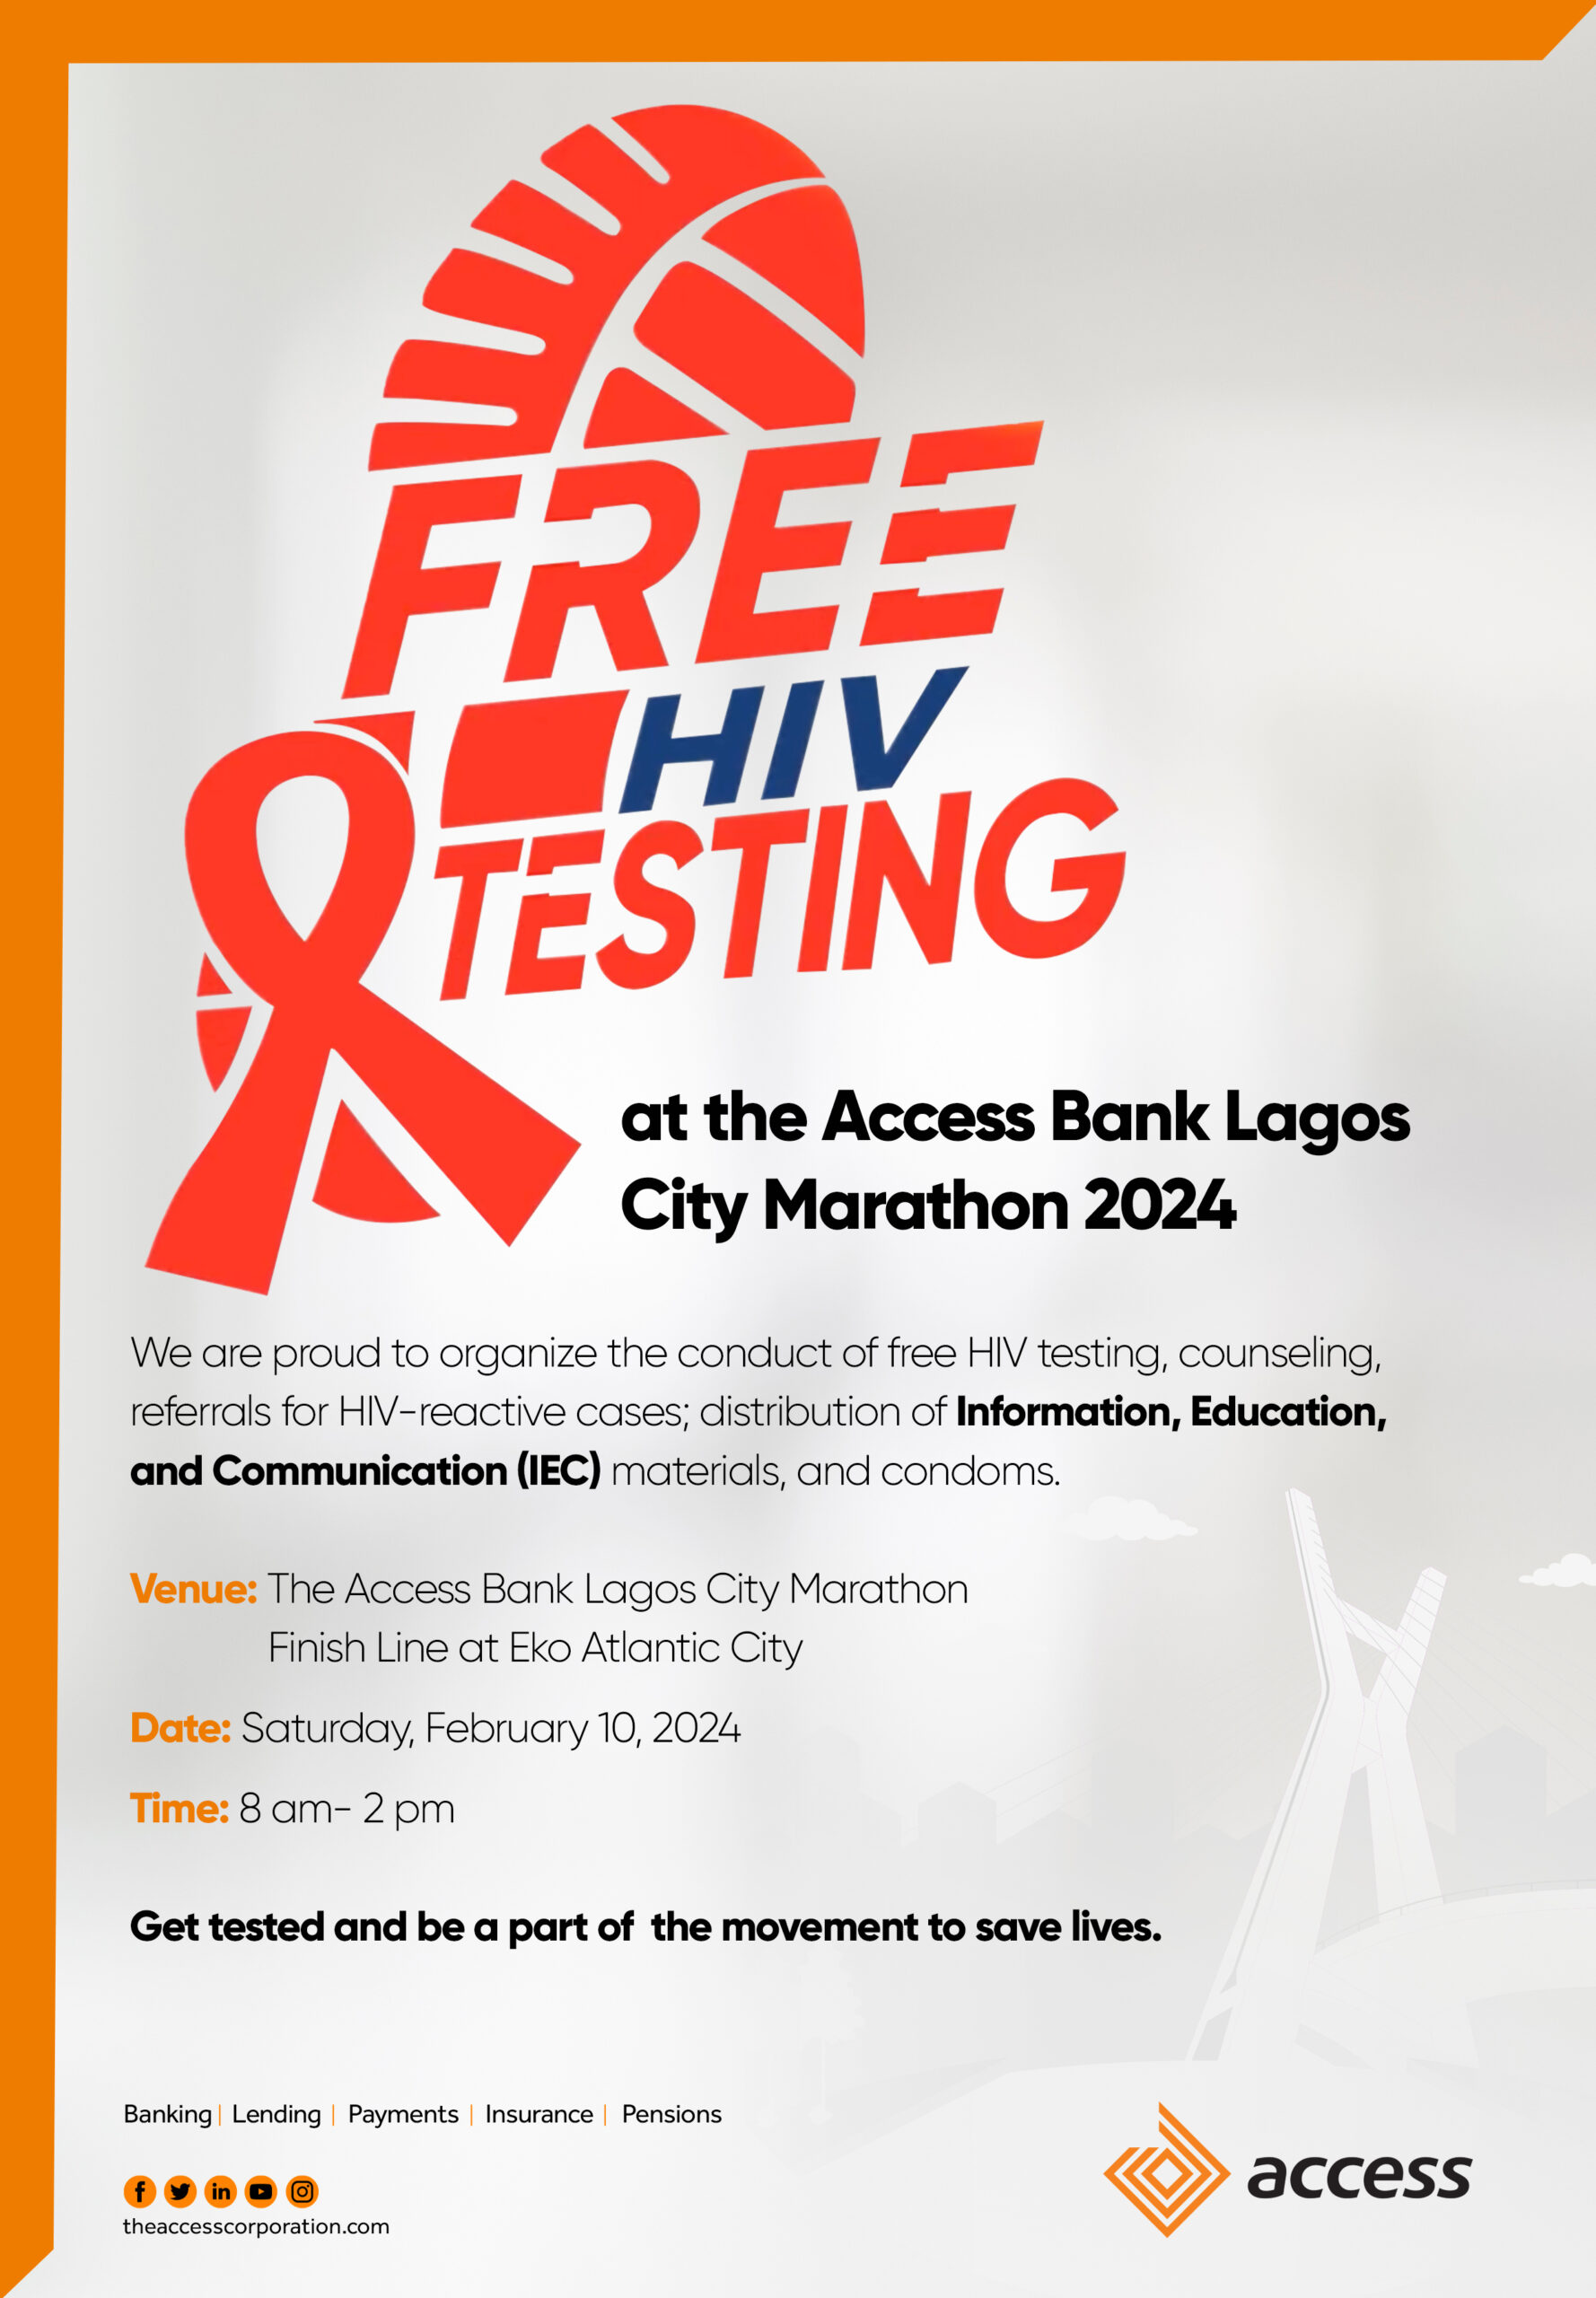 Access Holdings partners HACEY, NiBUCAA to advance HIV/AIDS awareness and testing through Access Bank Lagos City Marathon